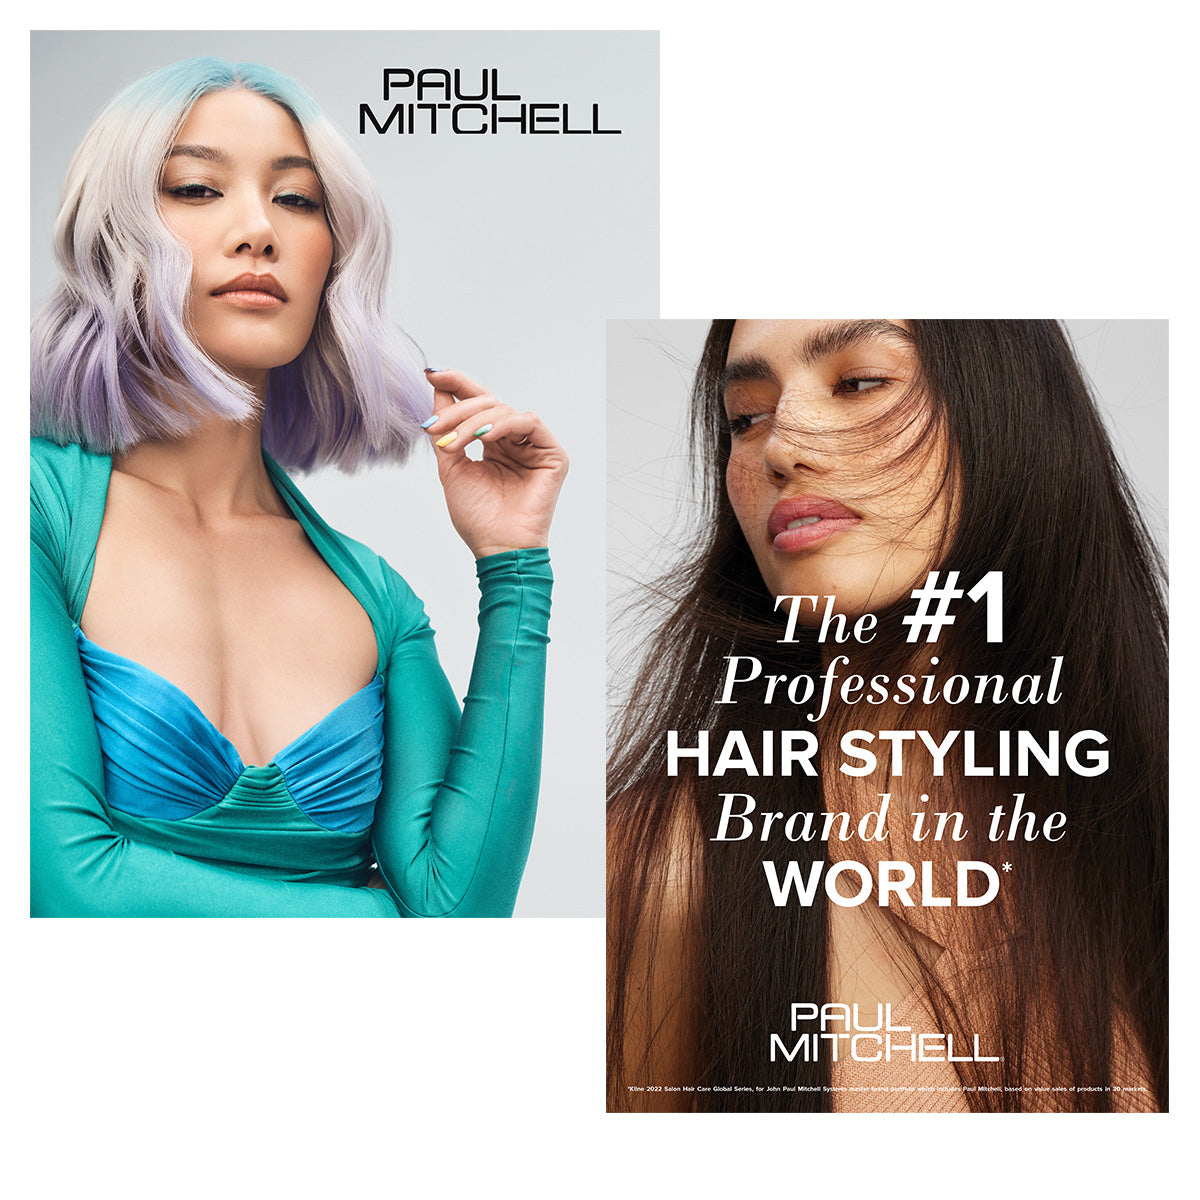 PAUL MITCHELL Poster